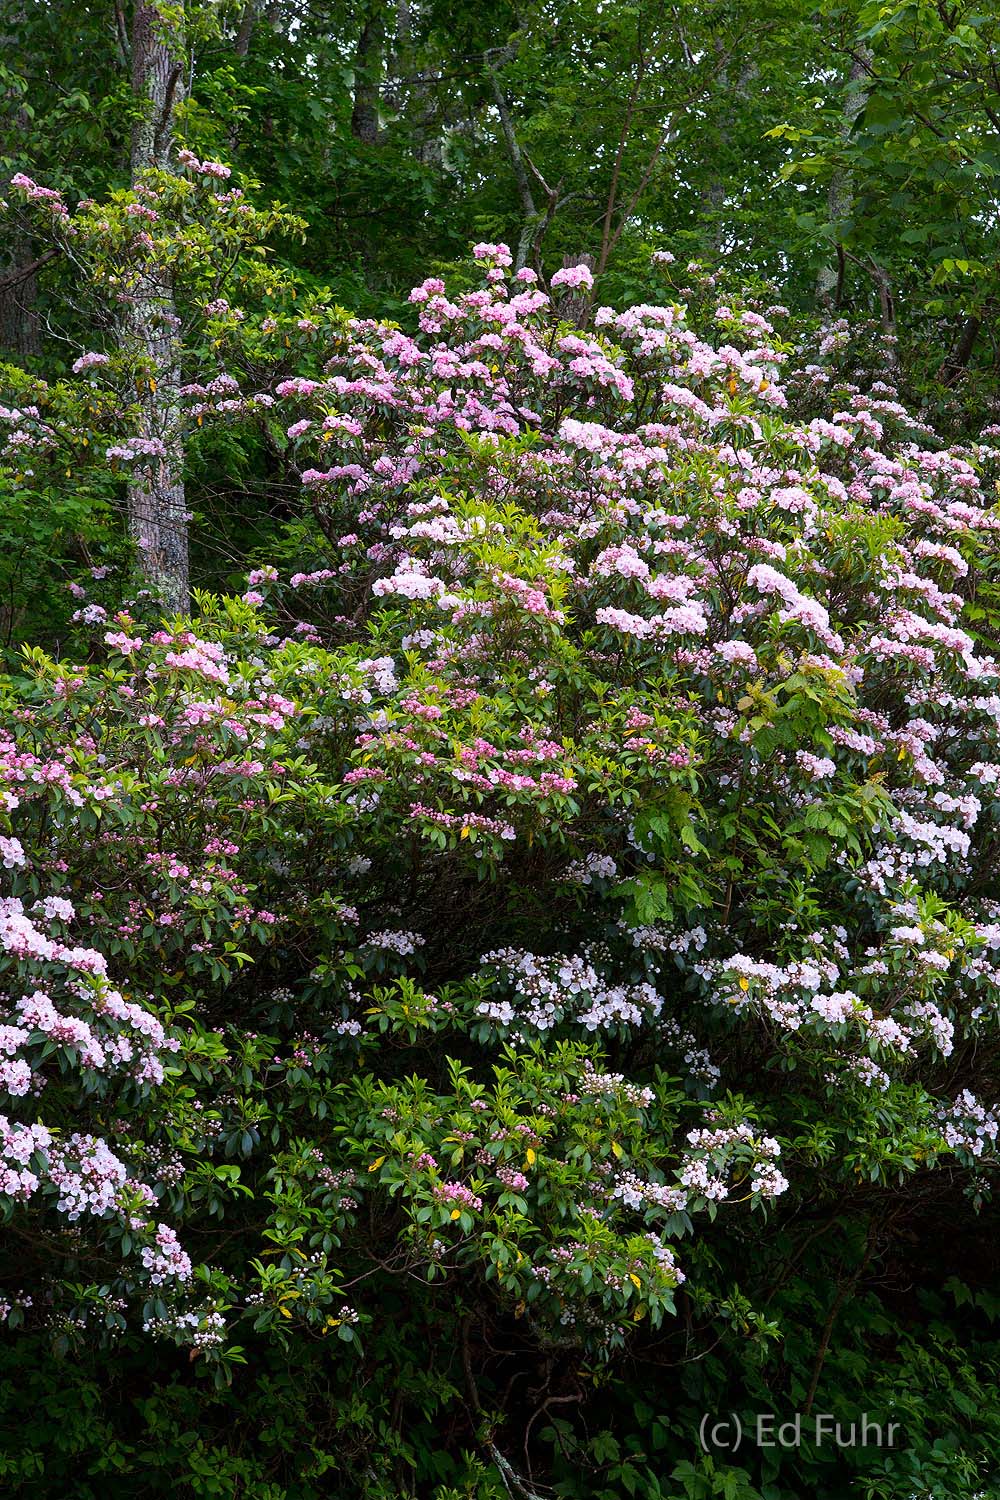 Planted in the 1930s, a tower of mountain laurels shows off its rosy pink and white colors in late May.